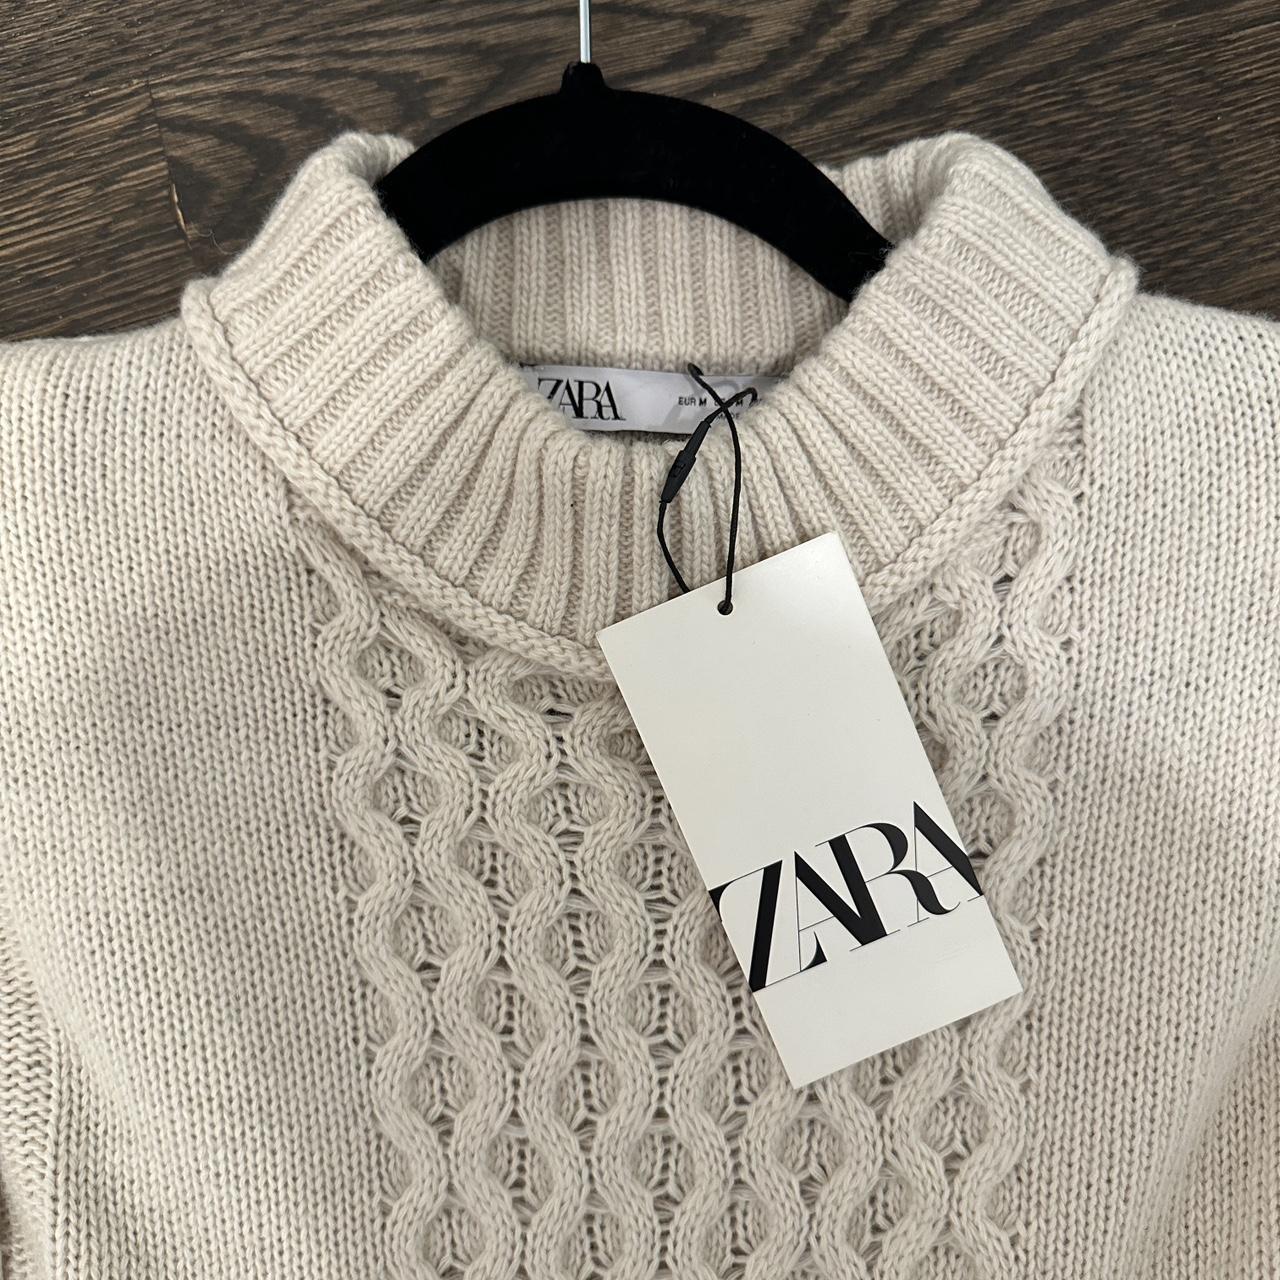 Zara Women's Cable Cashmere Knit Sweater